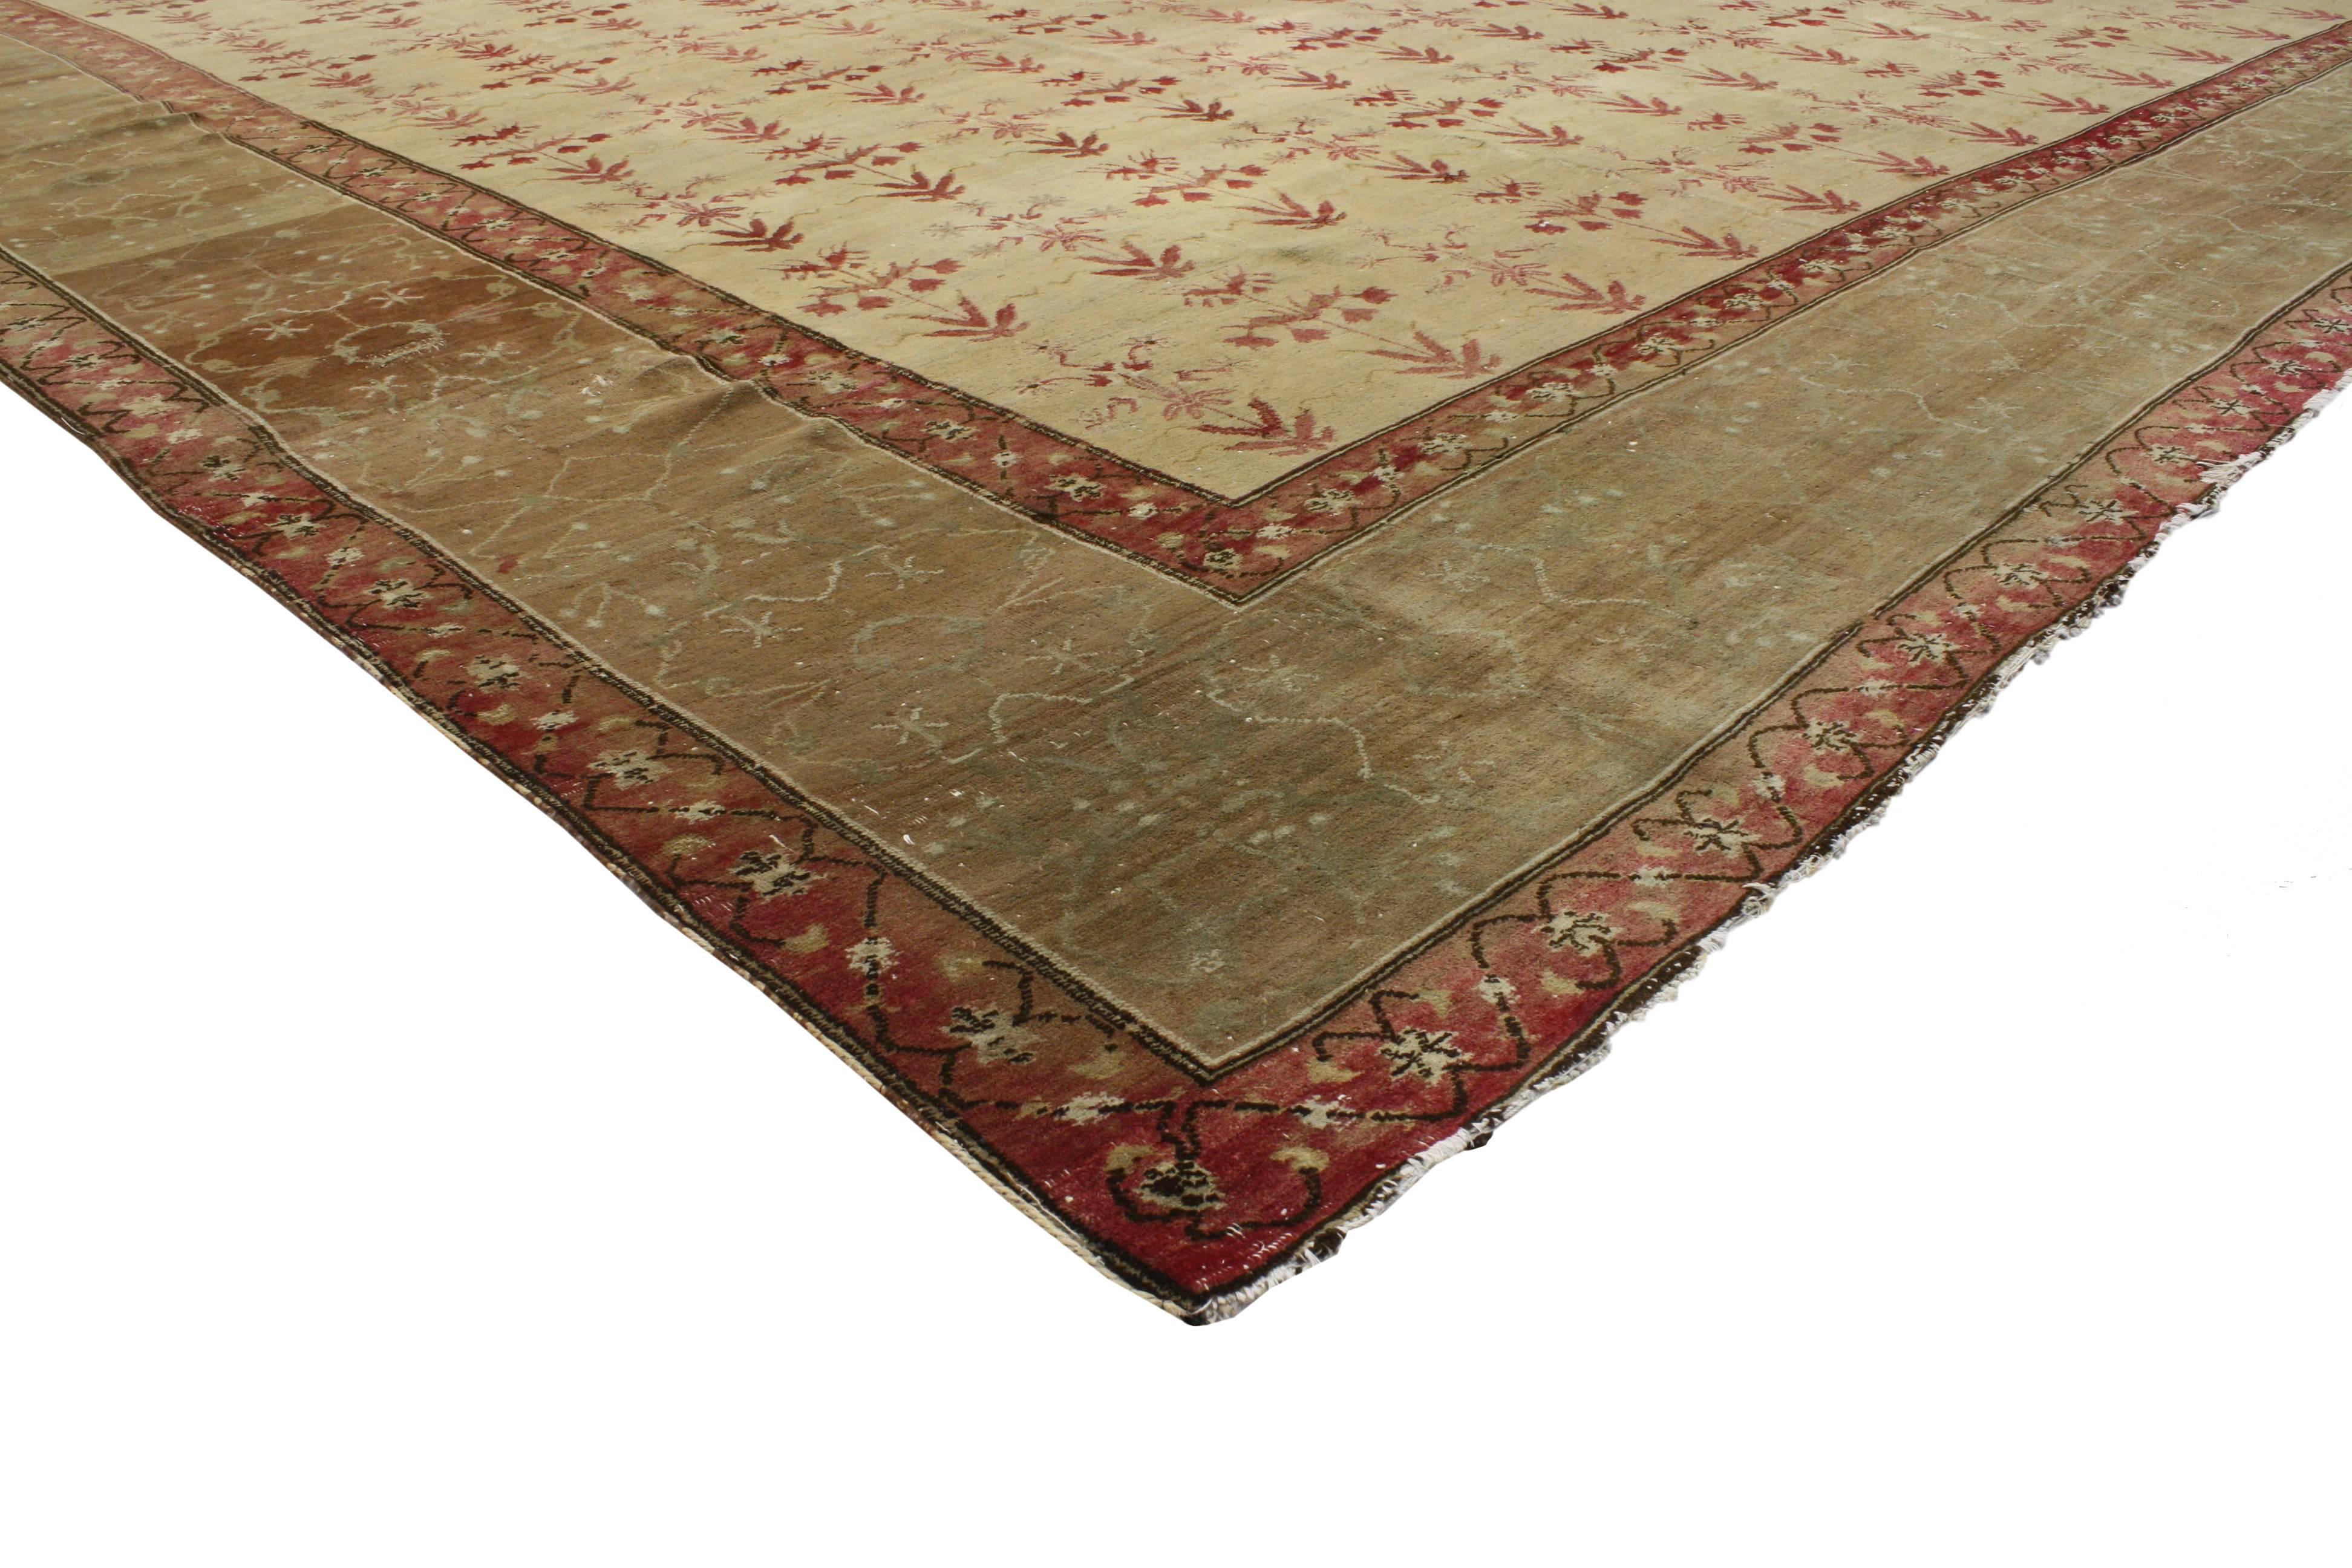 76679 Antique Indian Agra Rug with Modern Traditional Style 13'02 x 16'02. The repetitive pattern in this antique Indian Agra rug synthesizes beautifully with modern architecture and modern traditional style. Impeccably woven by Indian artisans,